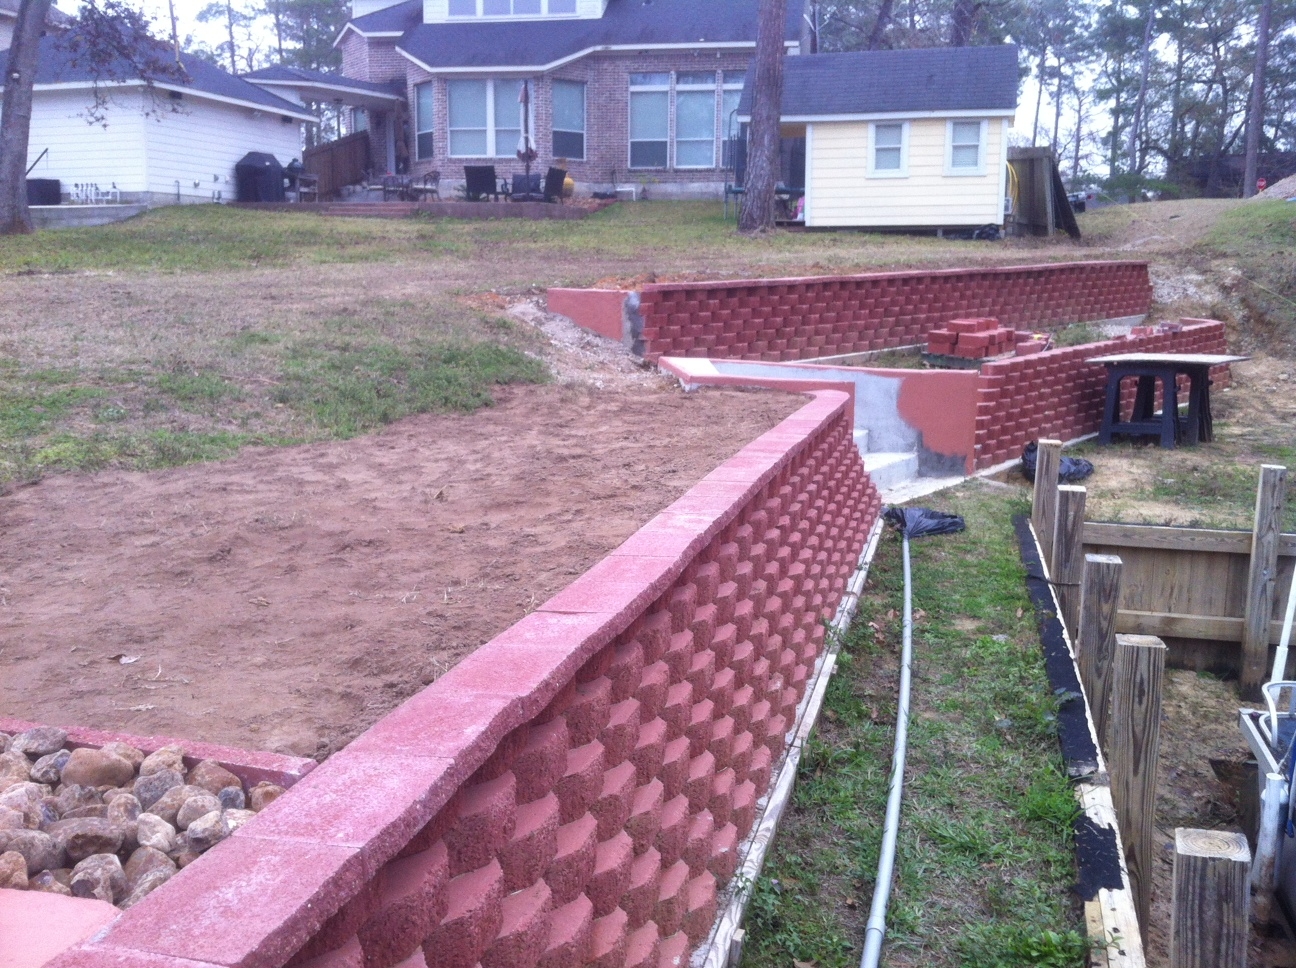 Retaining wall leaning (foundation, heater, insulating, stone) House remodeling, decorating